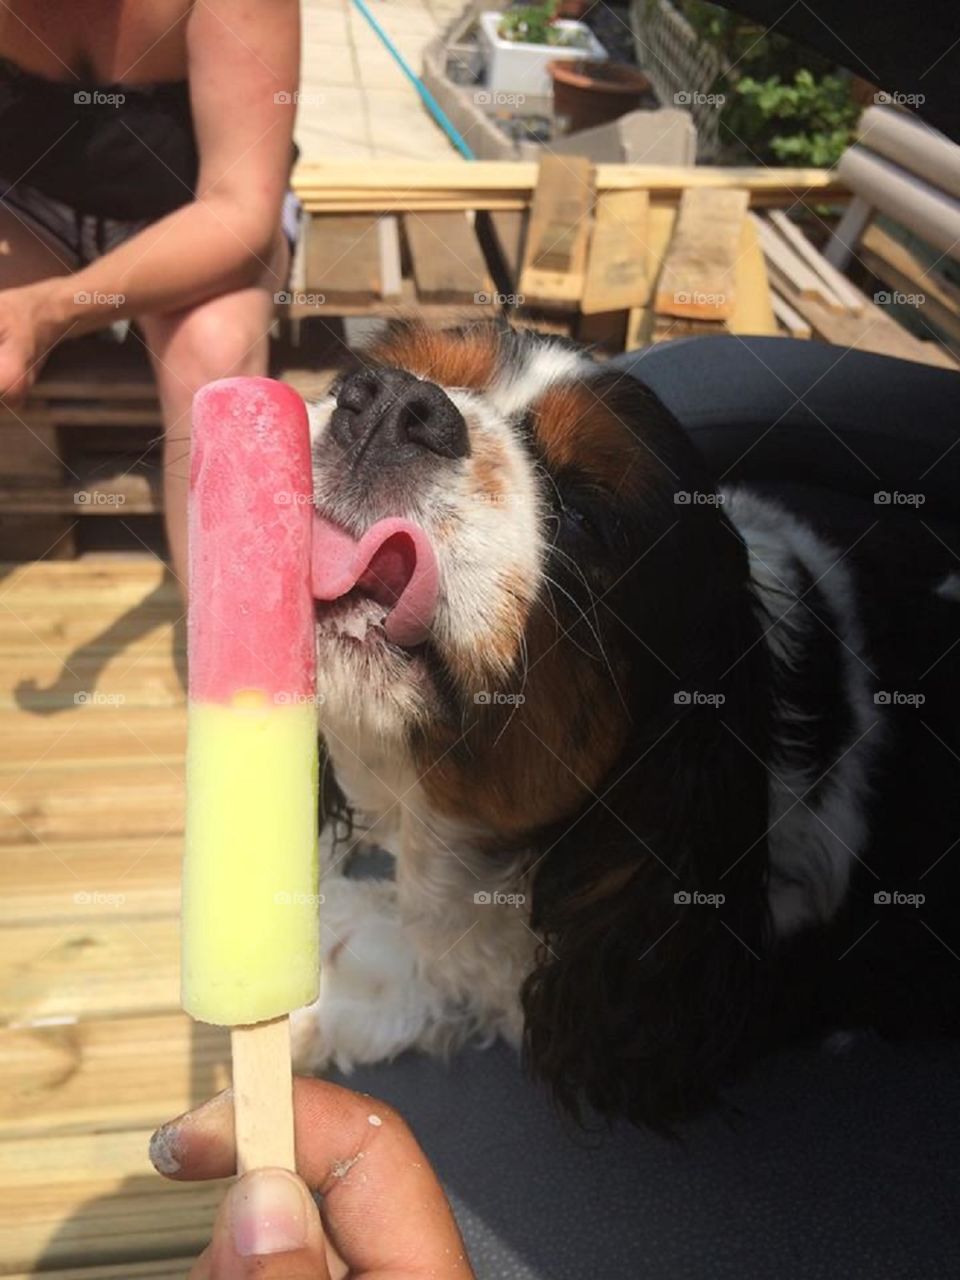 Walter the dog licks an ice lolly